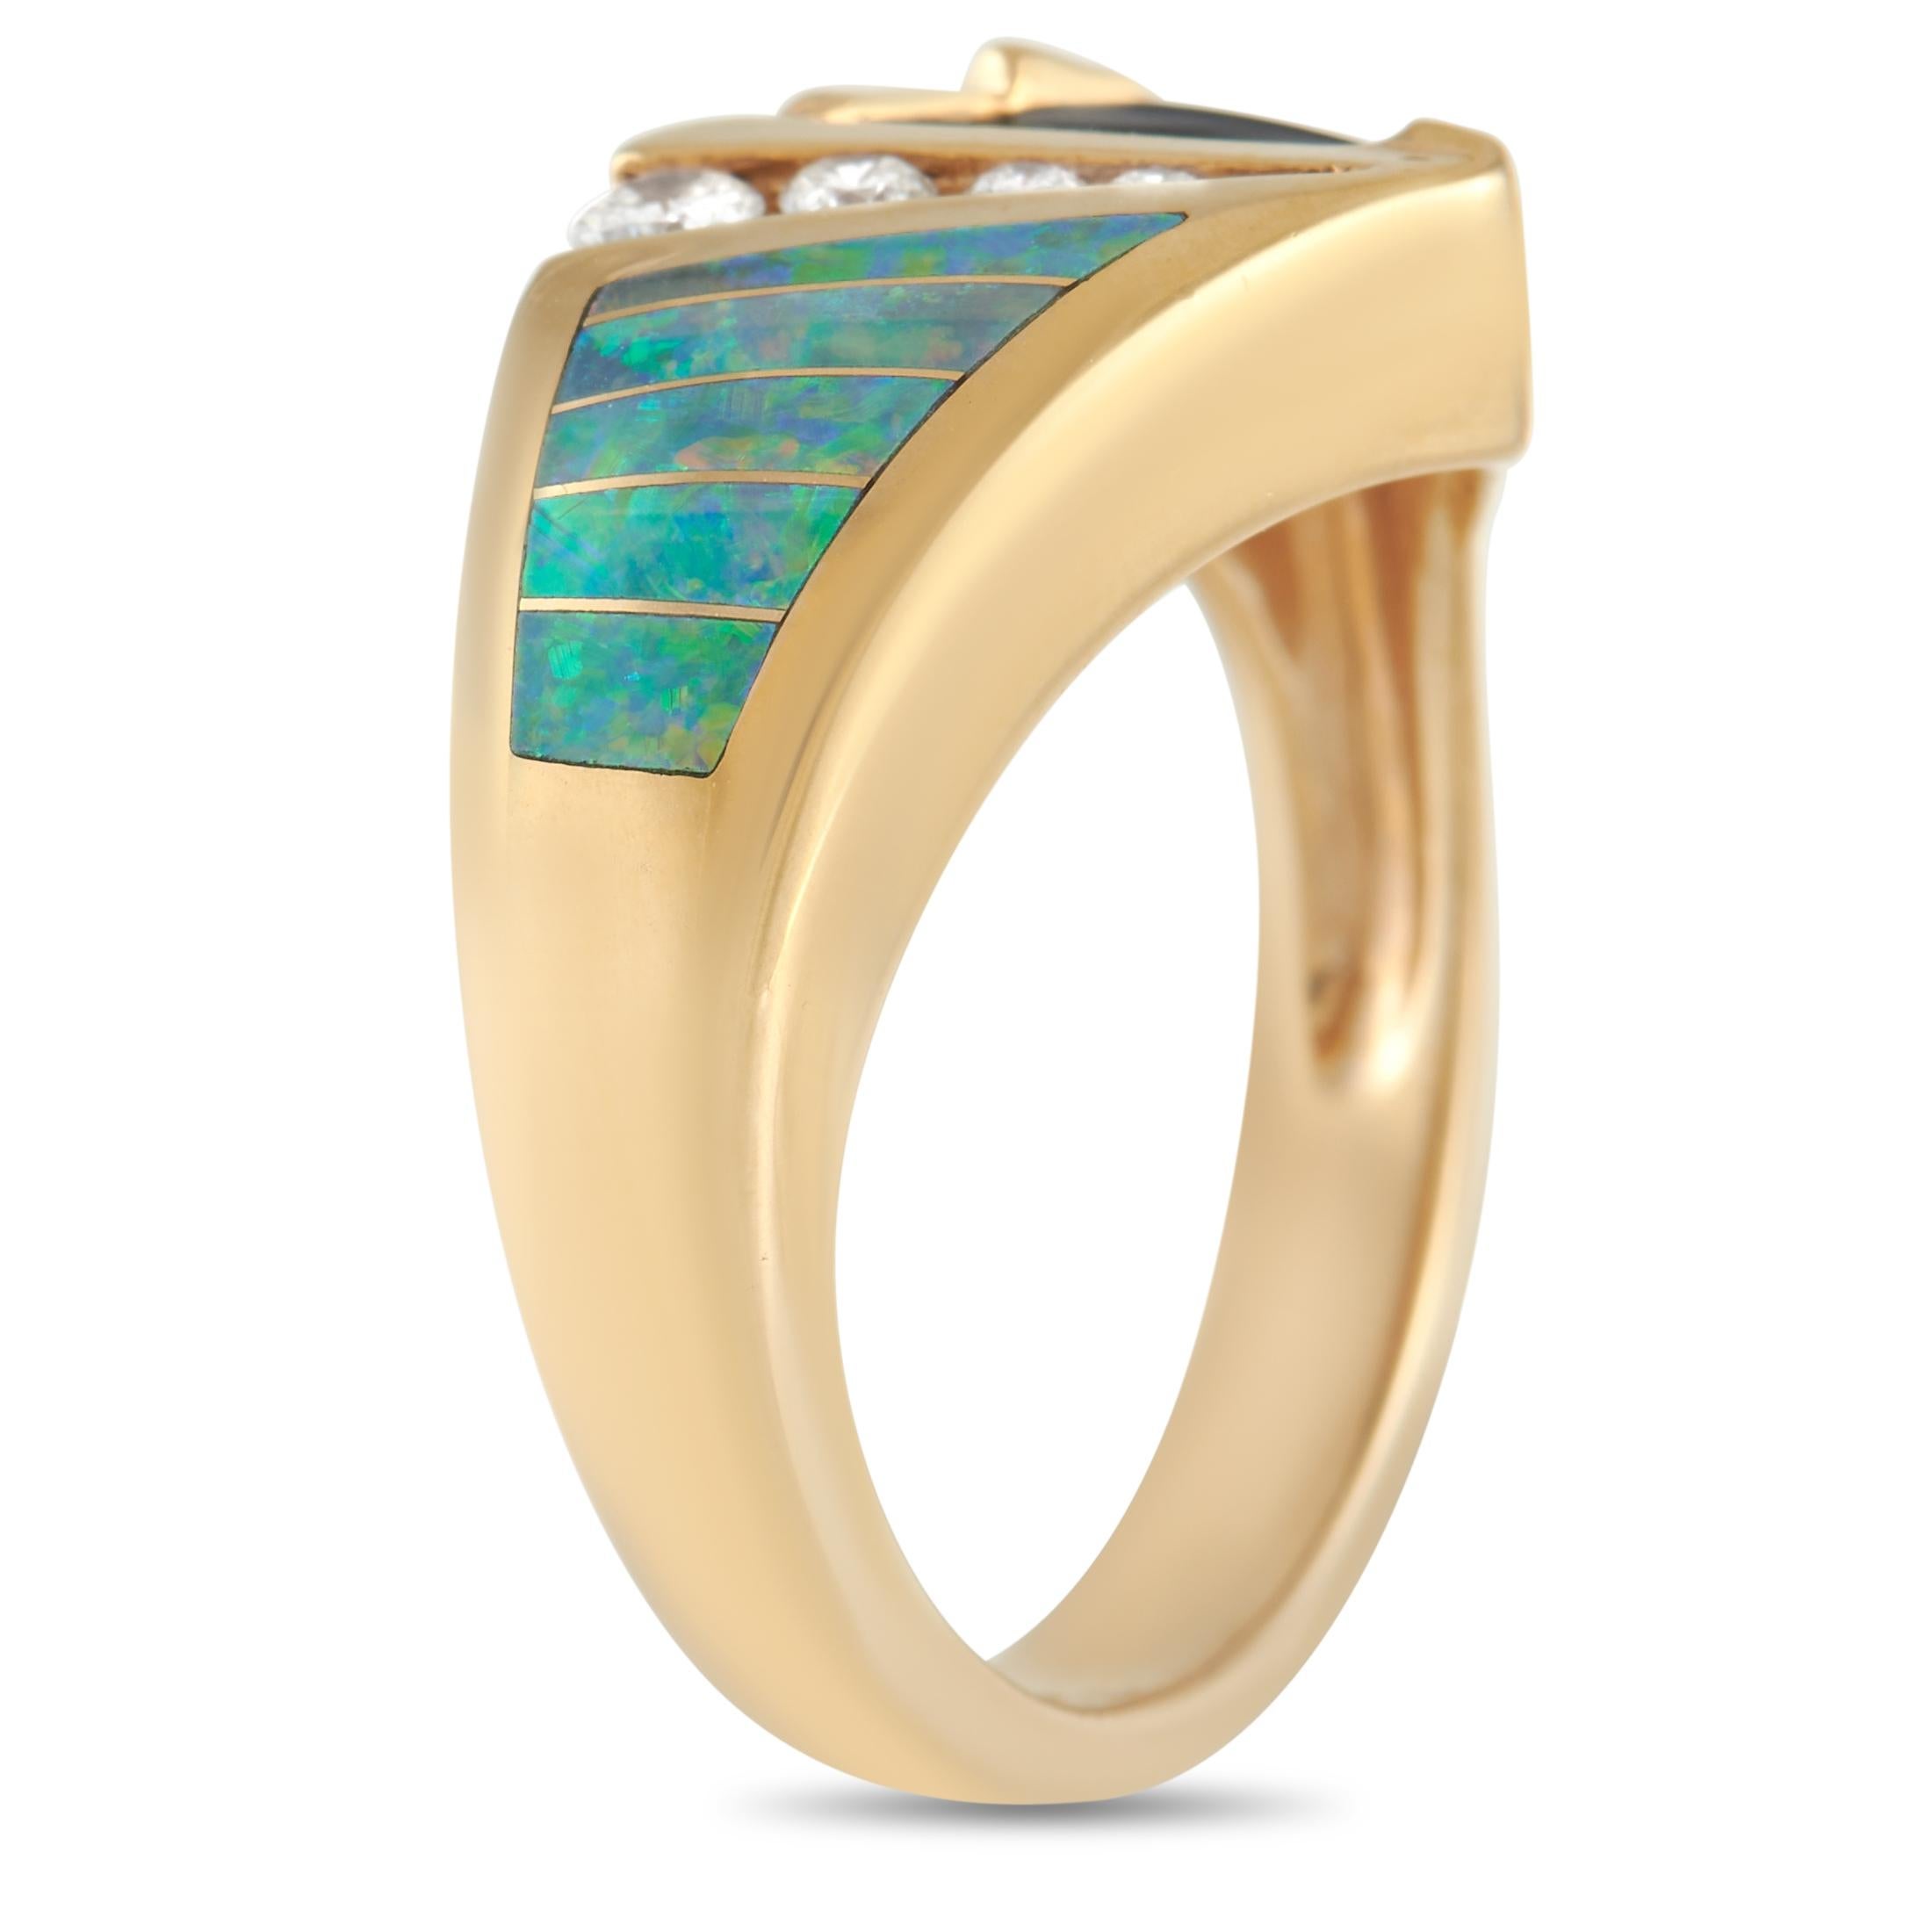 This creative Kabana ring will continually make a statement. The bold 14K Yellow Gold band features a 3mm wide band and a 4mm top height. It’s accented by fiery inlaid opal, 1.20 carats of green tourmaline, and 0.15 carats of diamonds at the center.